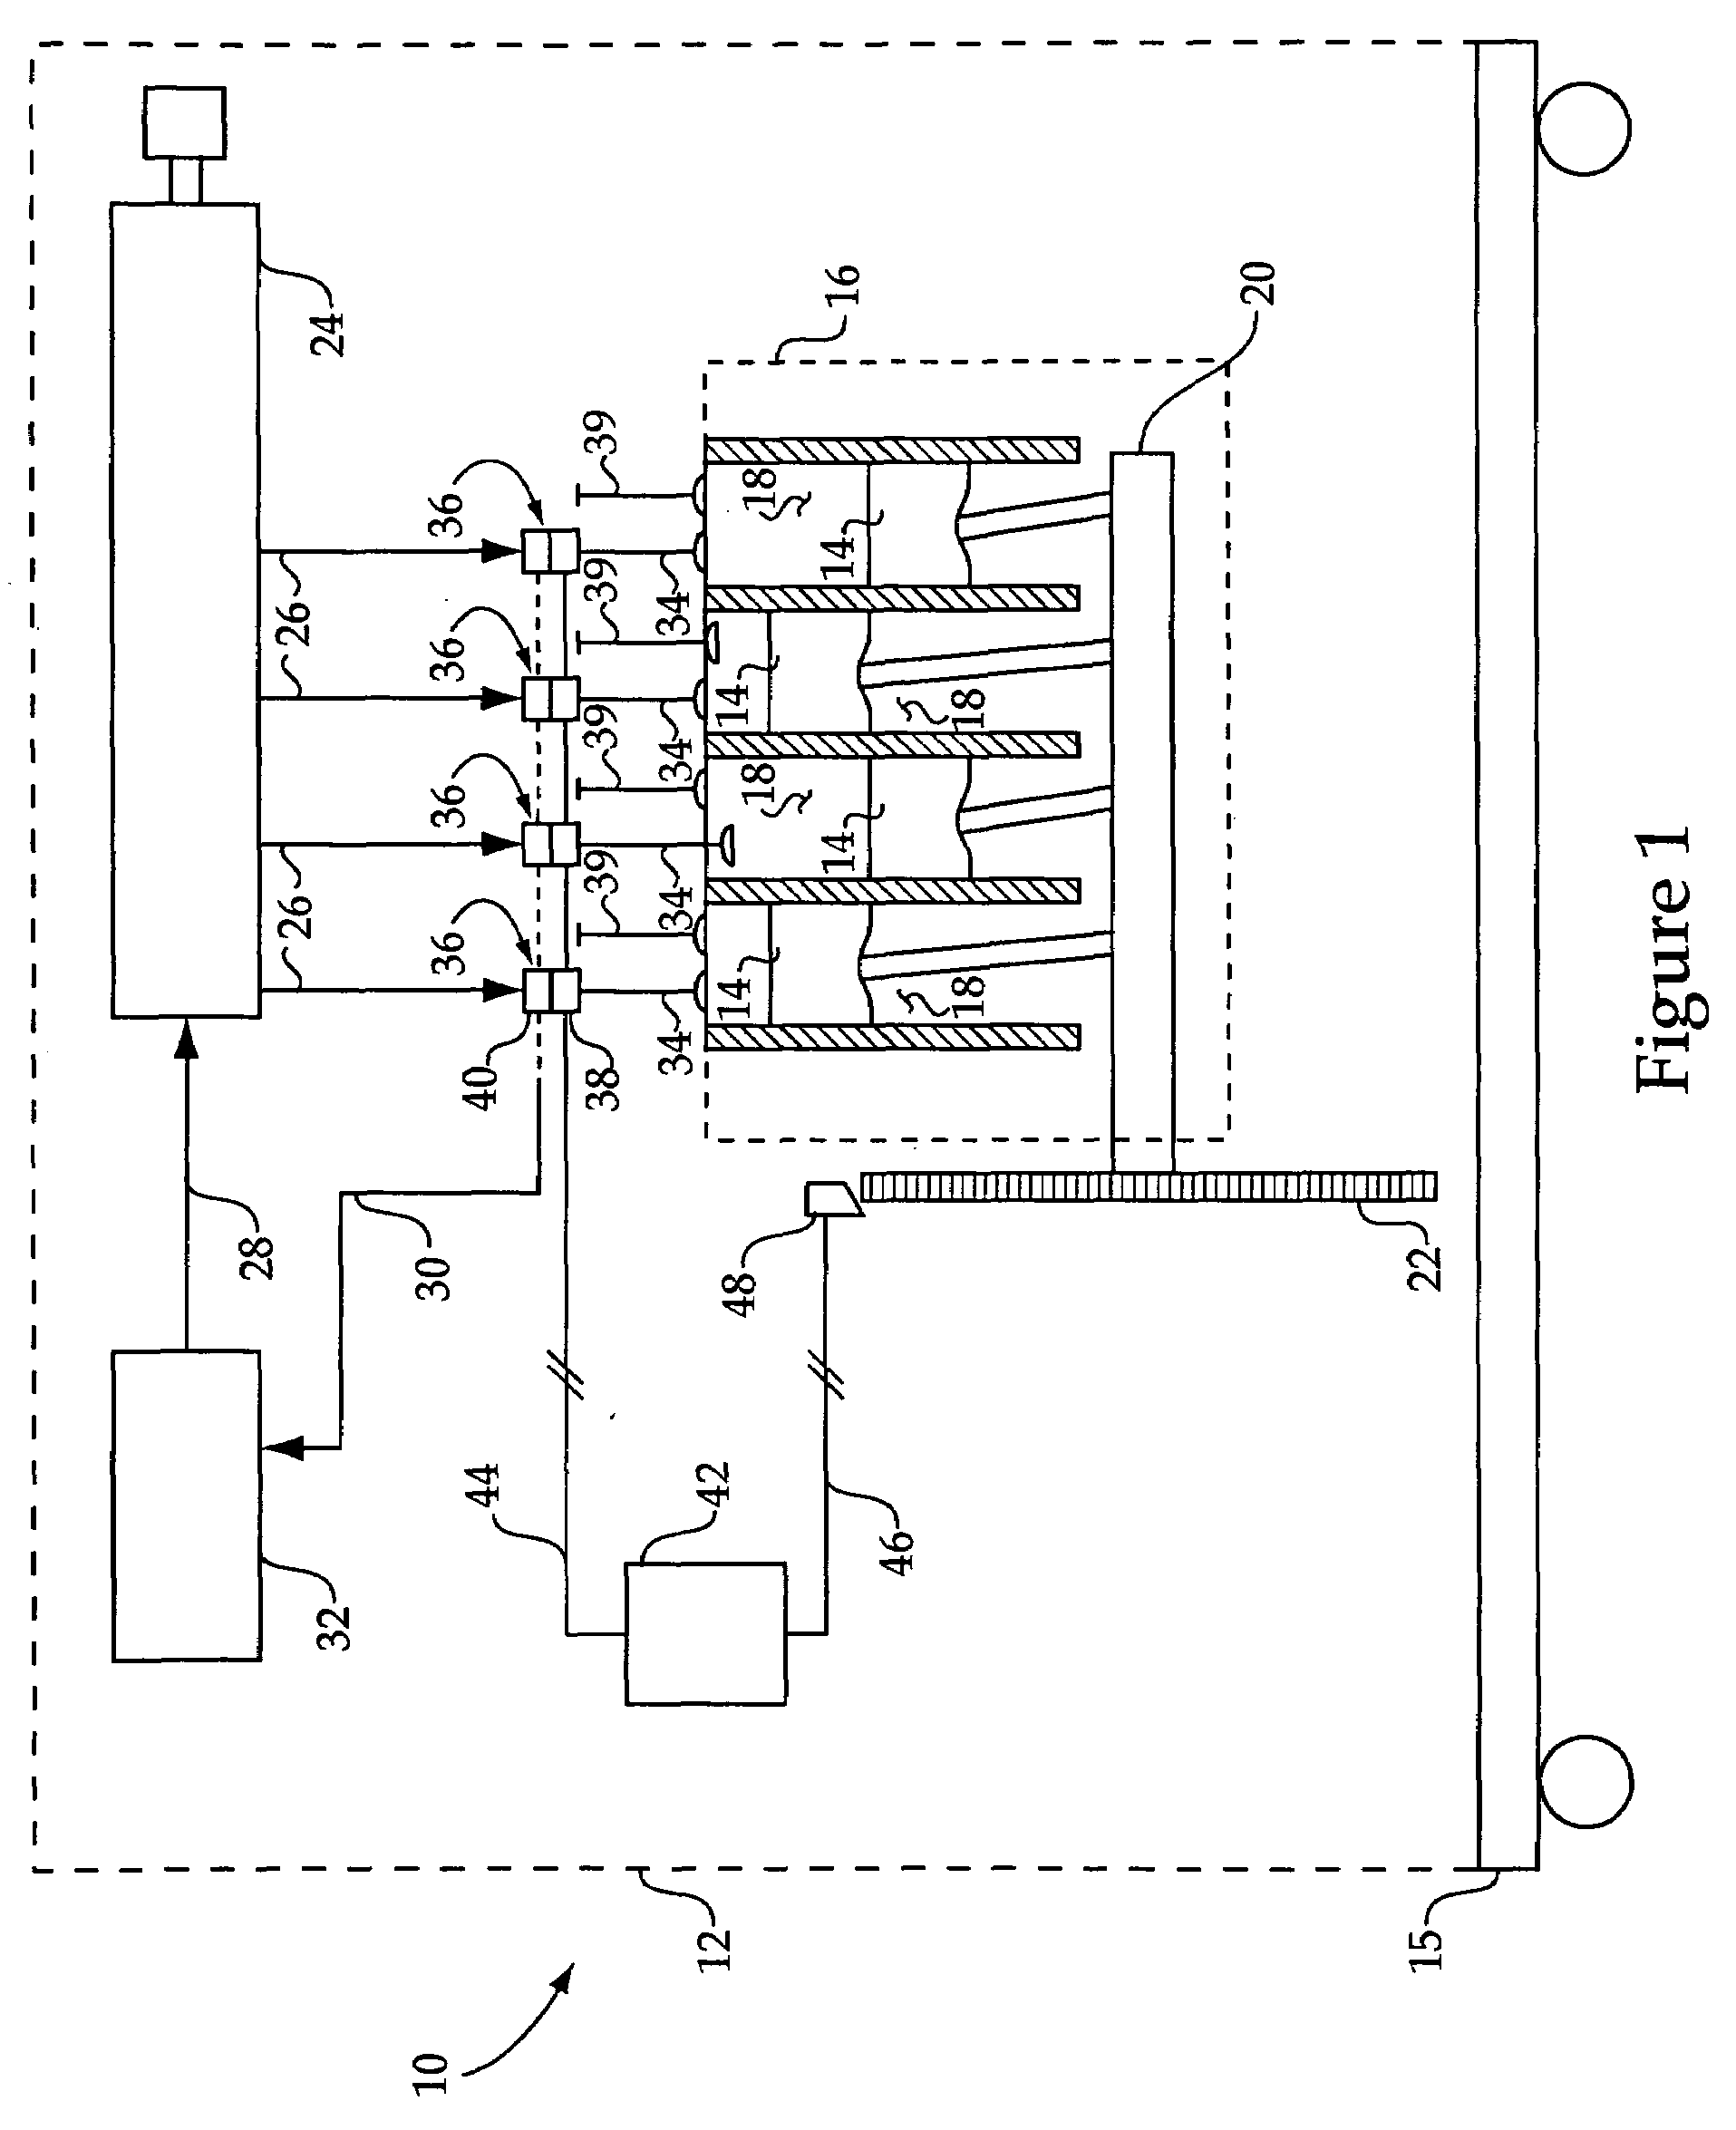 Variable valve performance detection strategy for internal combustion engine